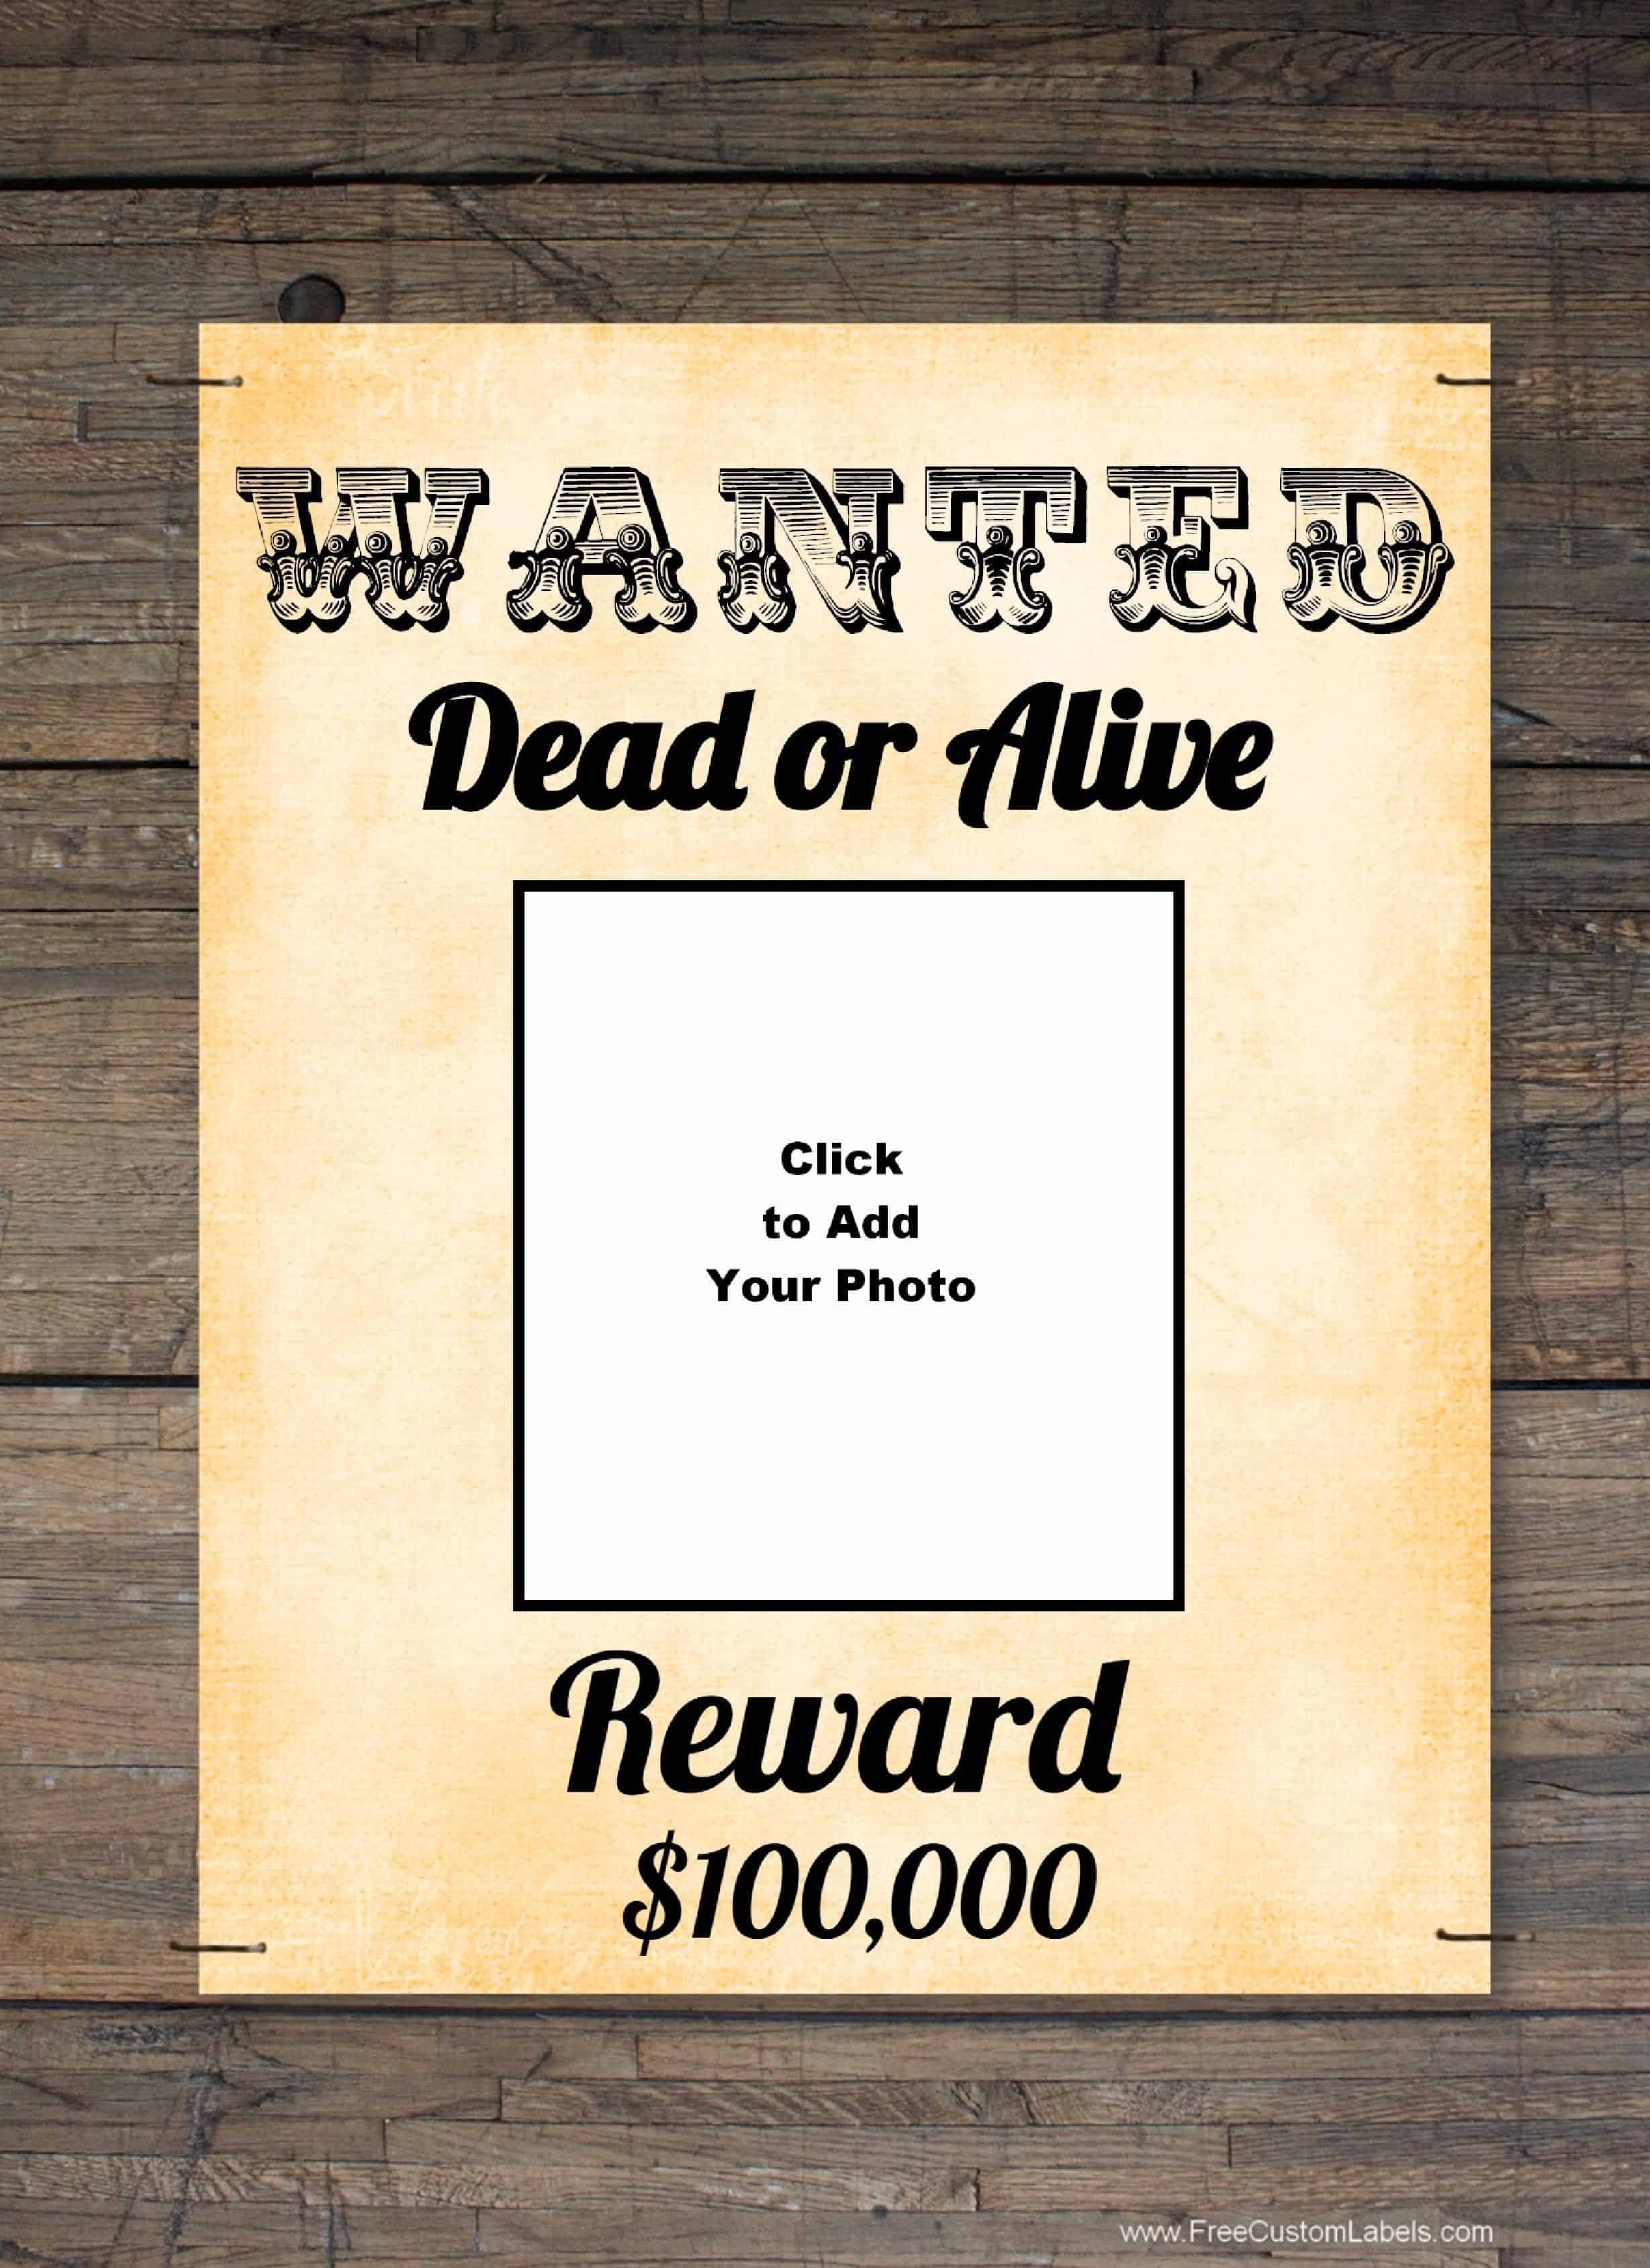 Free Wanted Poster Maker | Make A Free Printable Wanted Poster Online - Free Printable Poster Maker